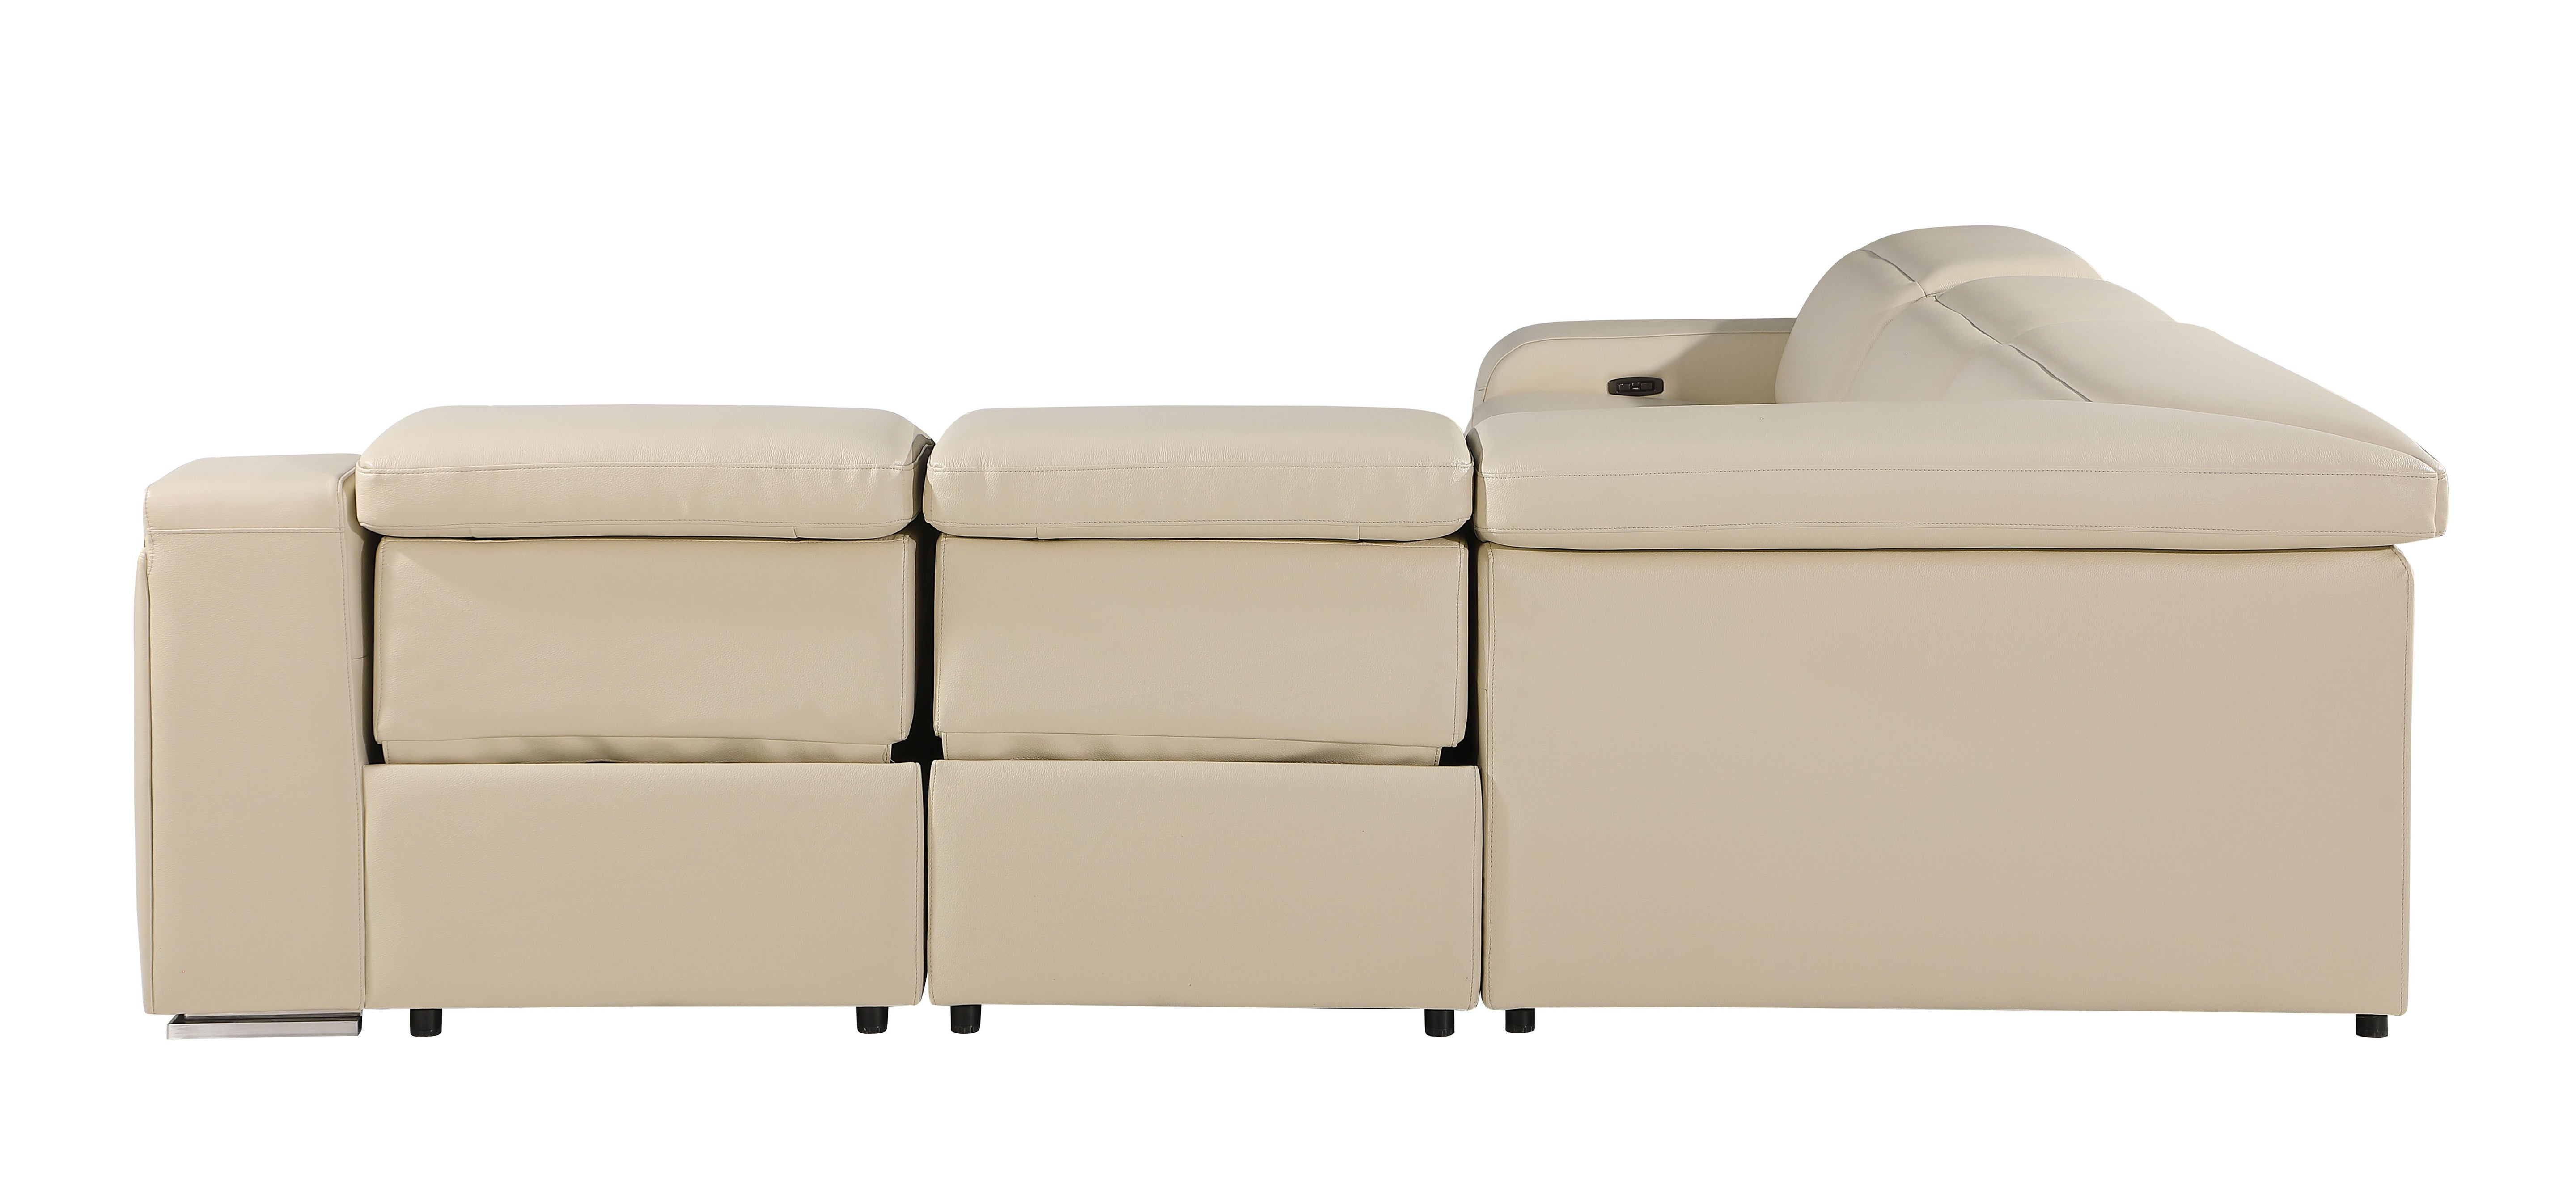 1116 - Power Reclining Italian Leather Sectional